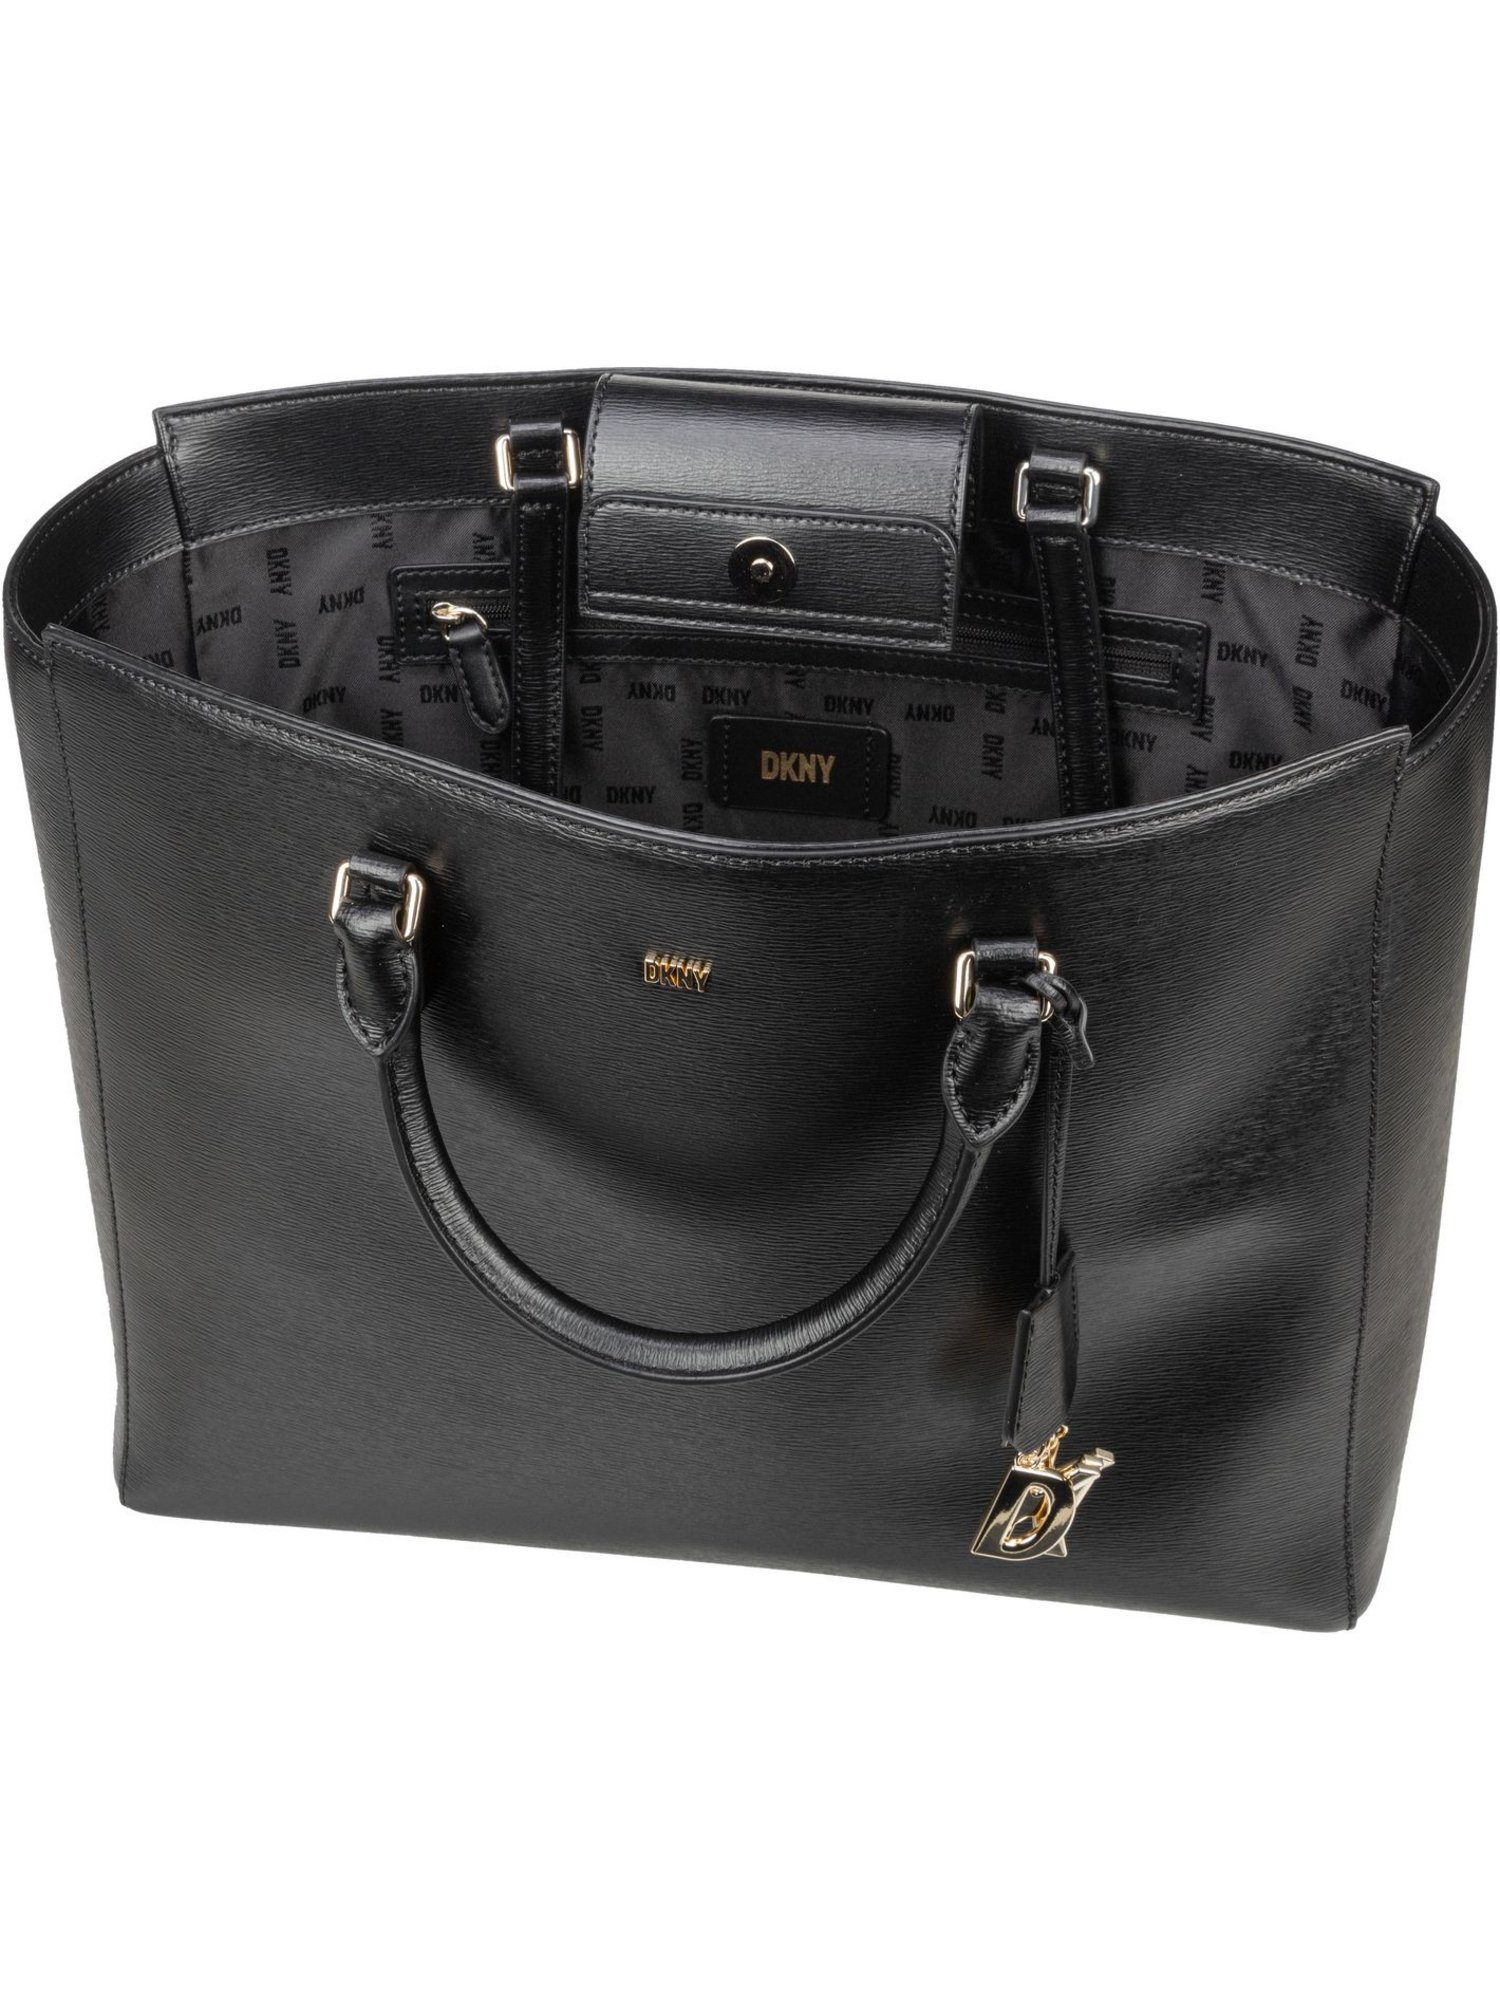 DKNY Book Sutton Paige Tote Shopper Leather